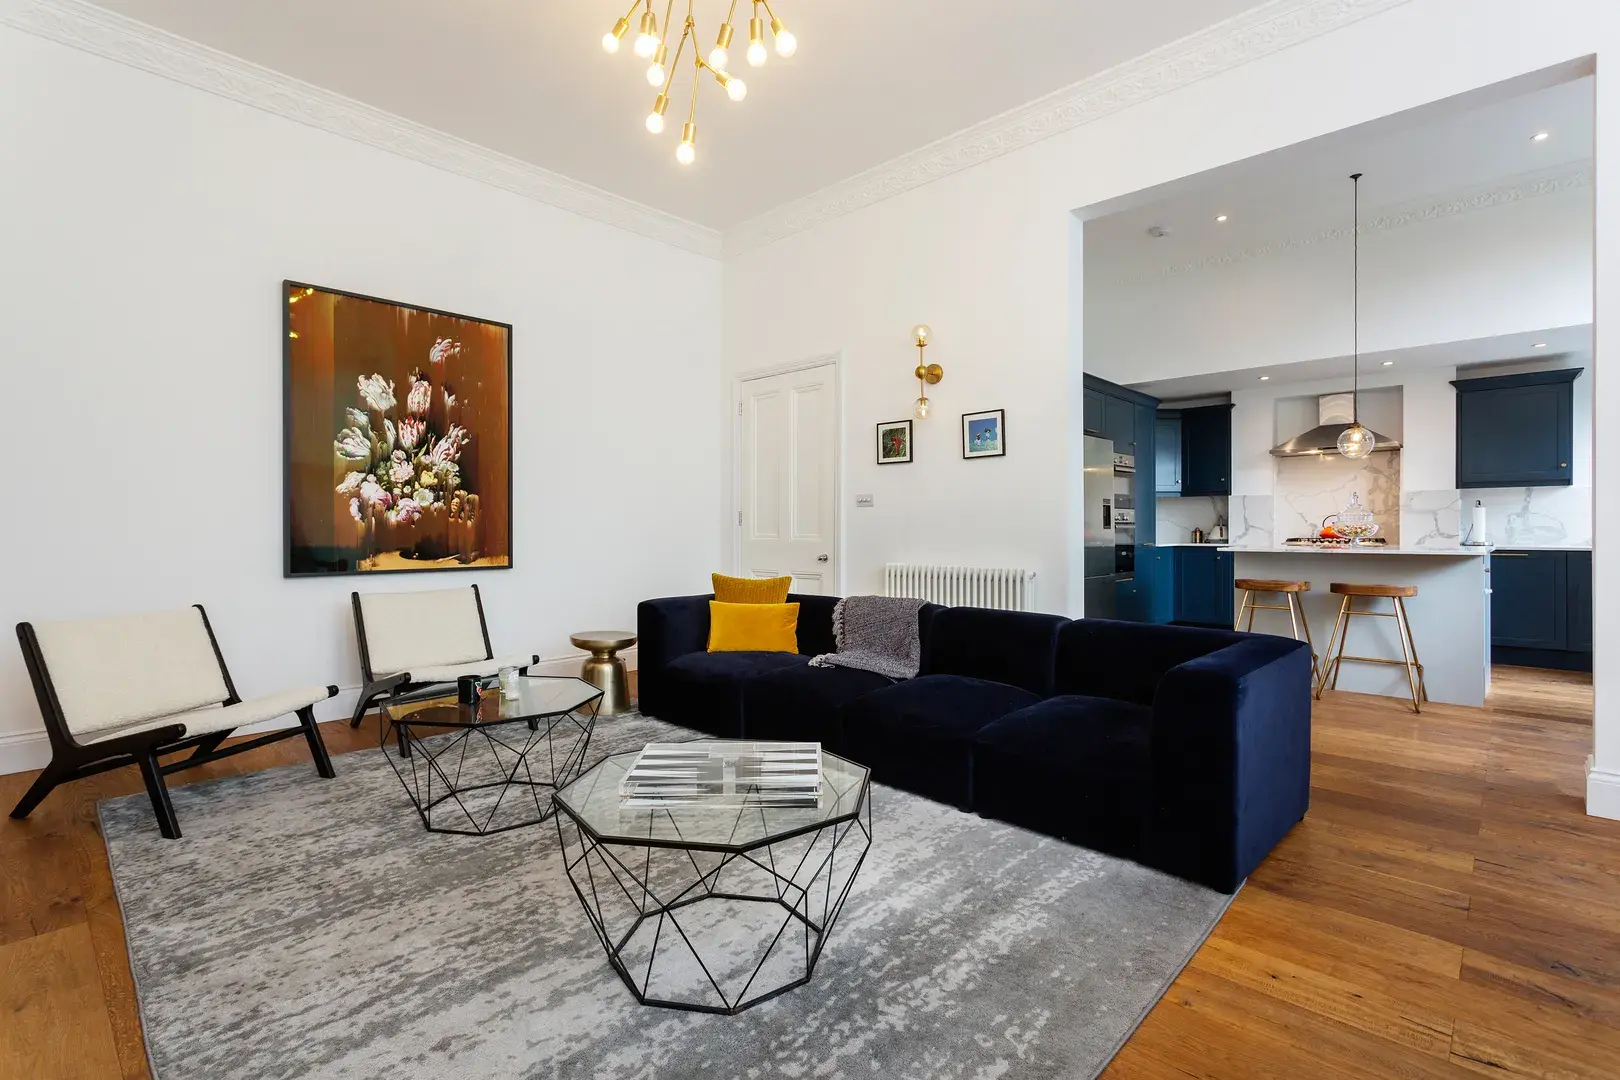 Fellows Road, holiday home in Primrose Hill, London